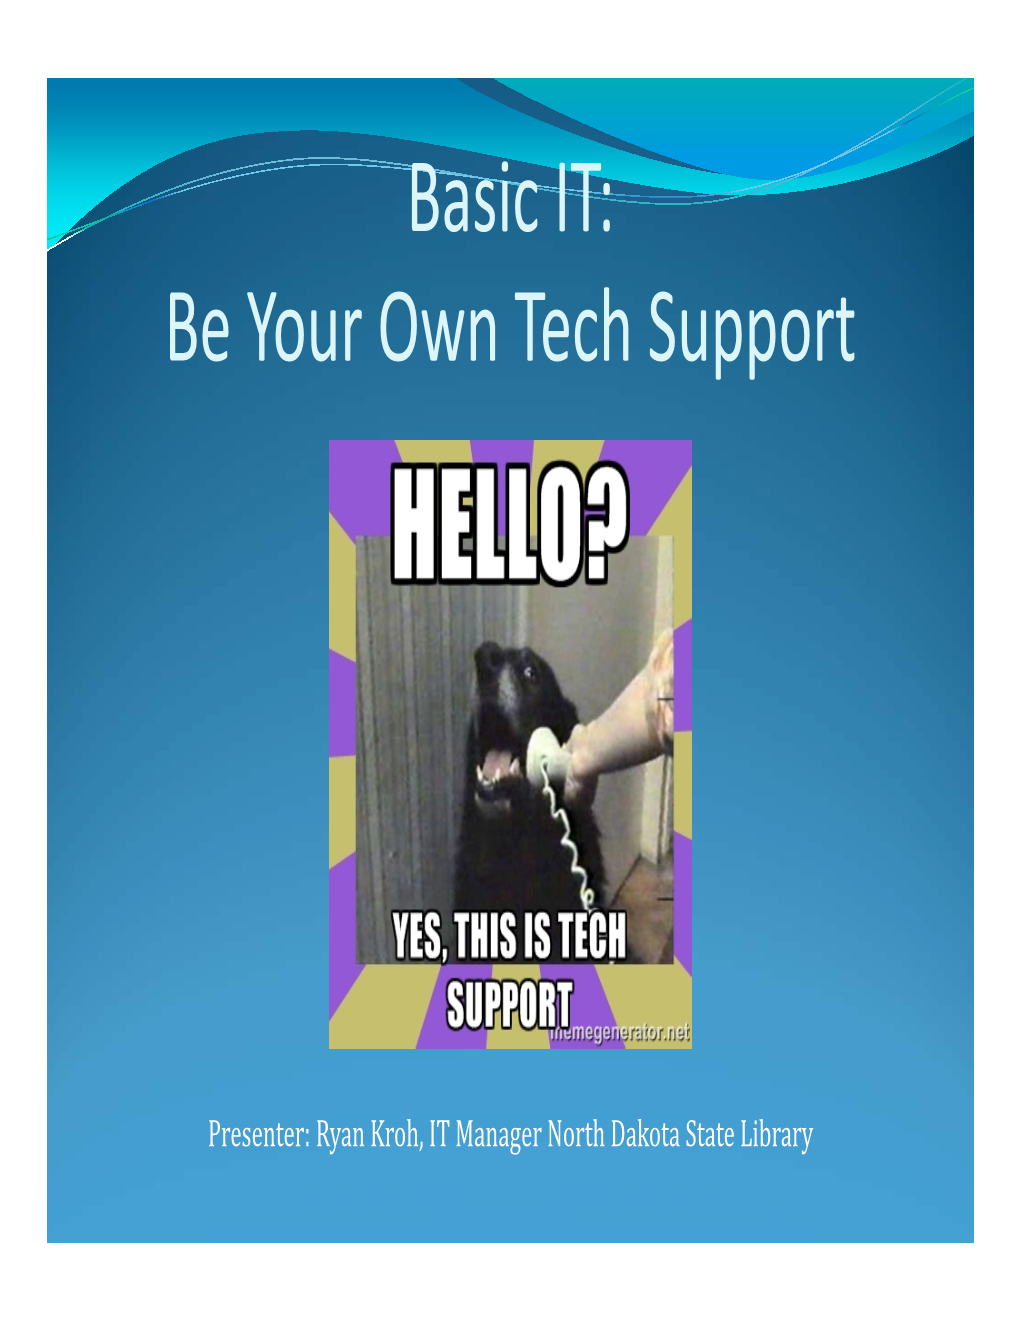 Be Your Own Tech Support